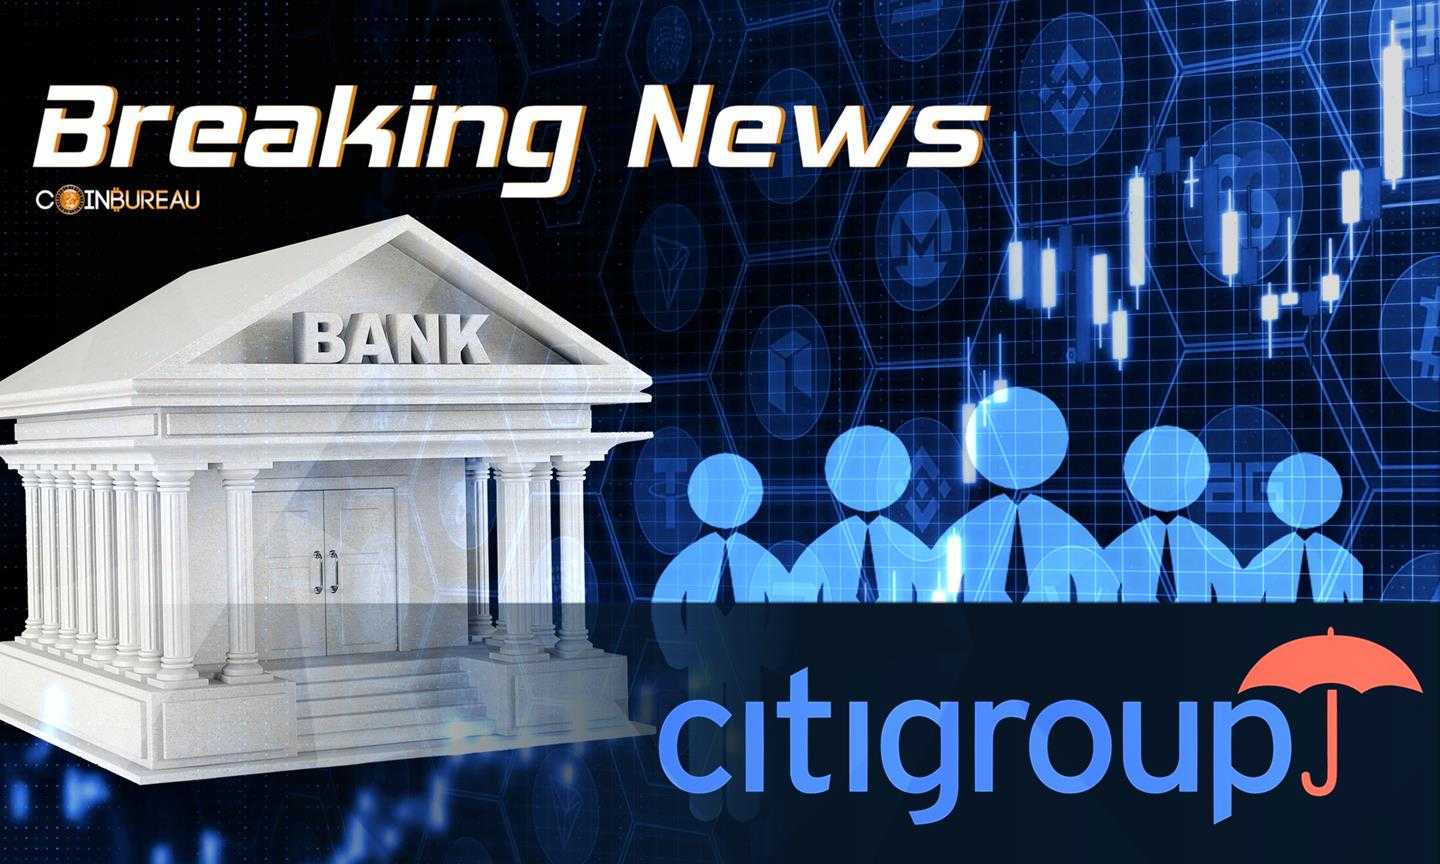 Banking Giant CitiGroup To Hire 100